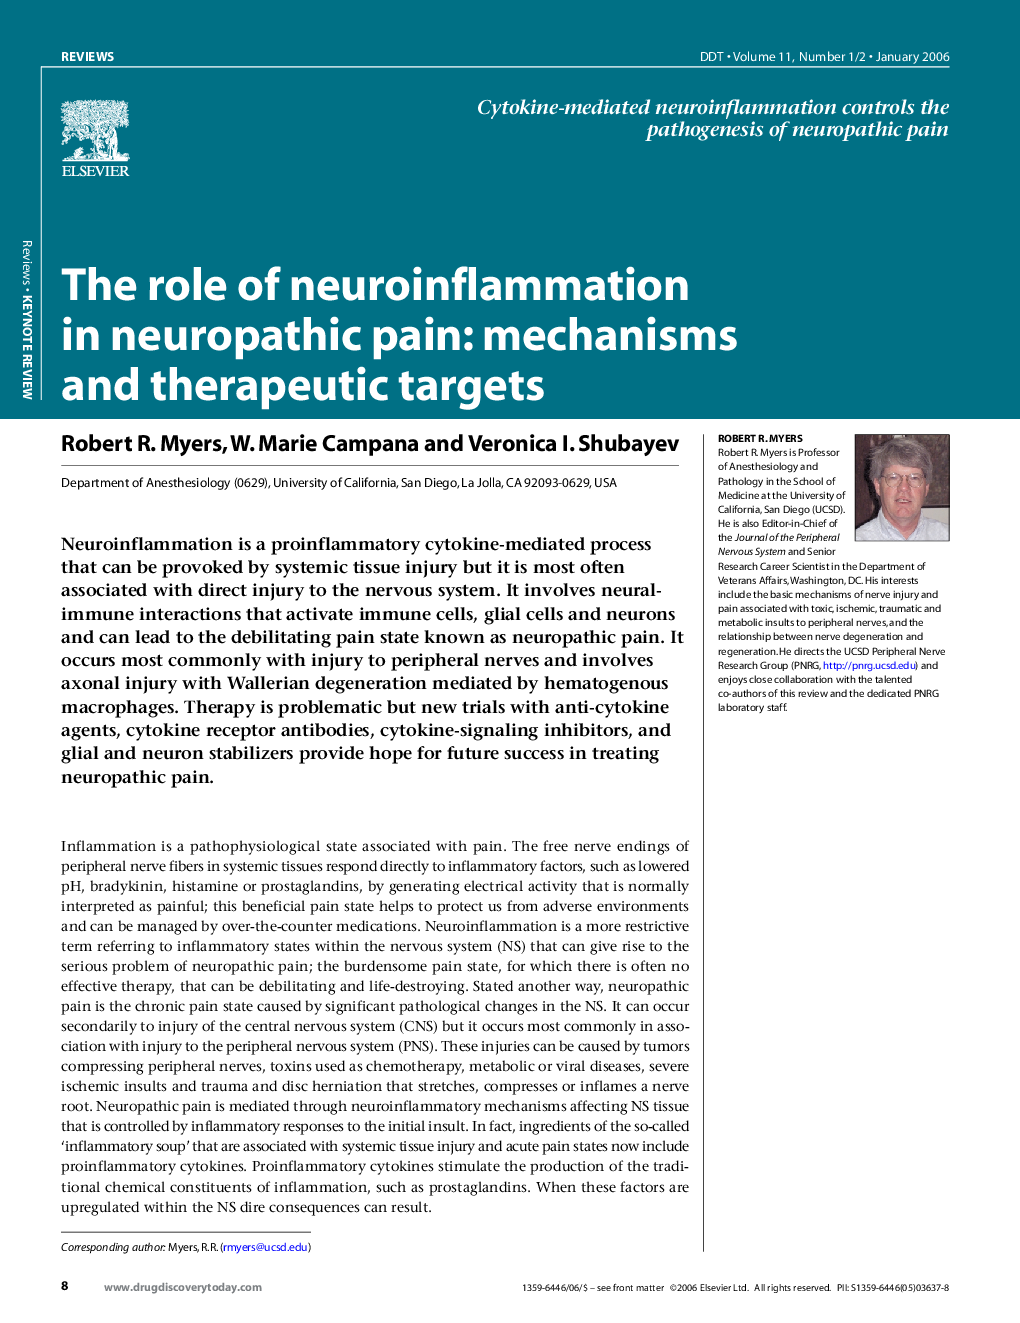 The role of neuroinflammation in neuropathic pain: mechanisms and therapeutic targets